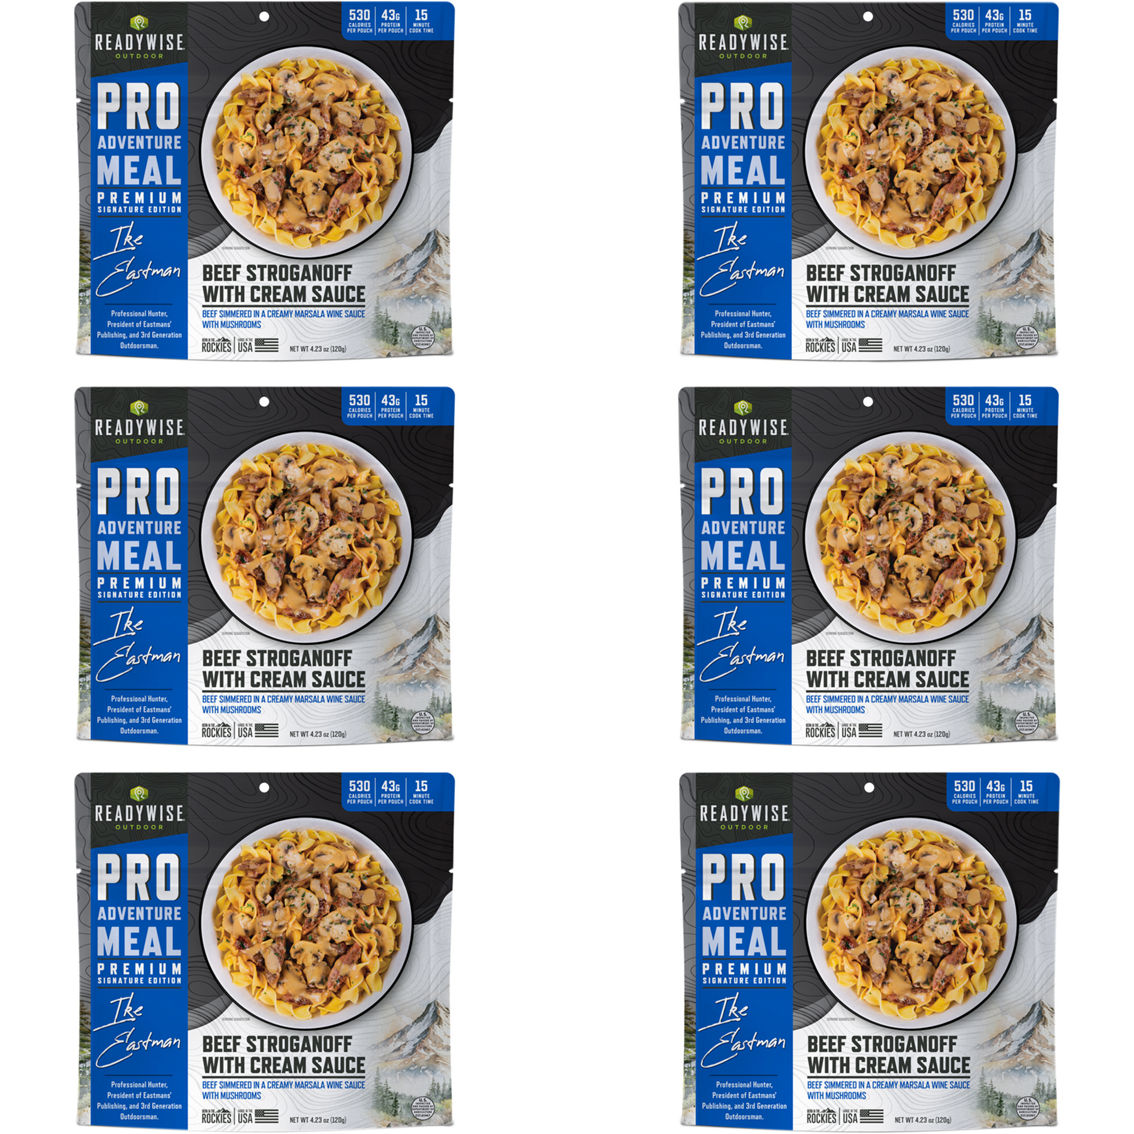 ReadyWise Pro Adventure Meal Beef Stroganoff with Cream Sauce 6 pk. - Image 2 of 5